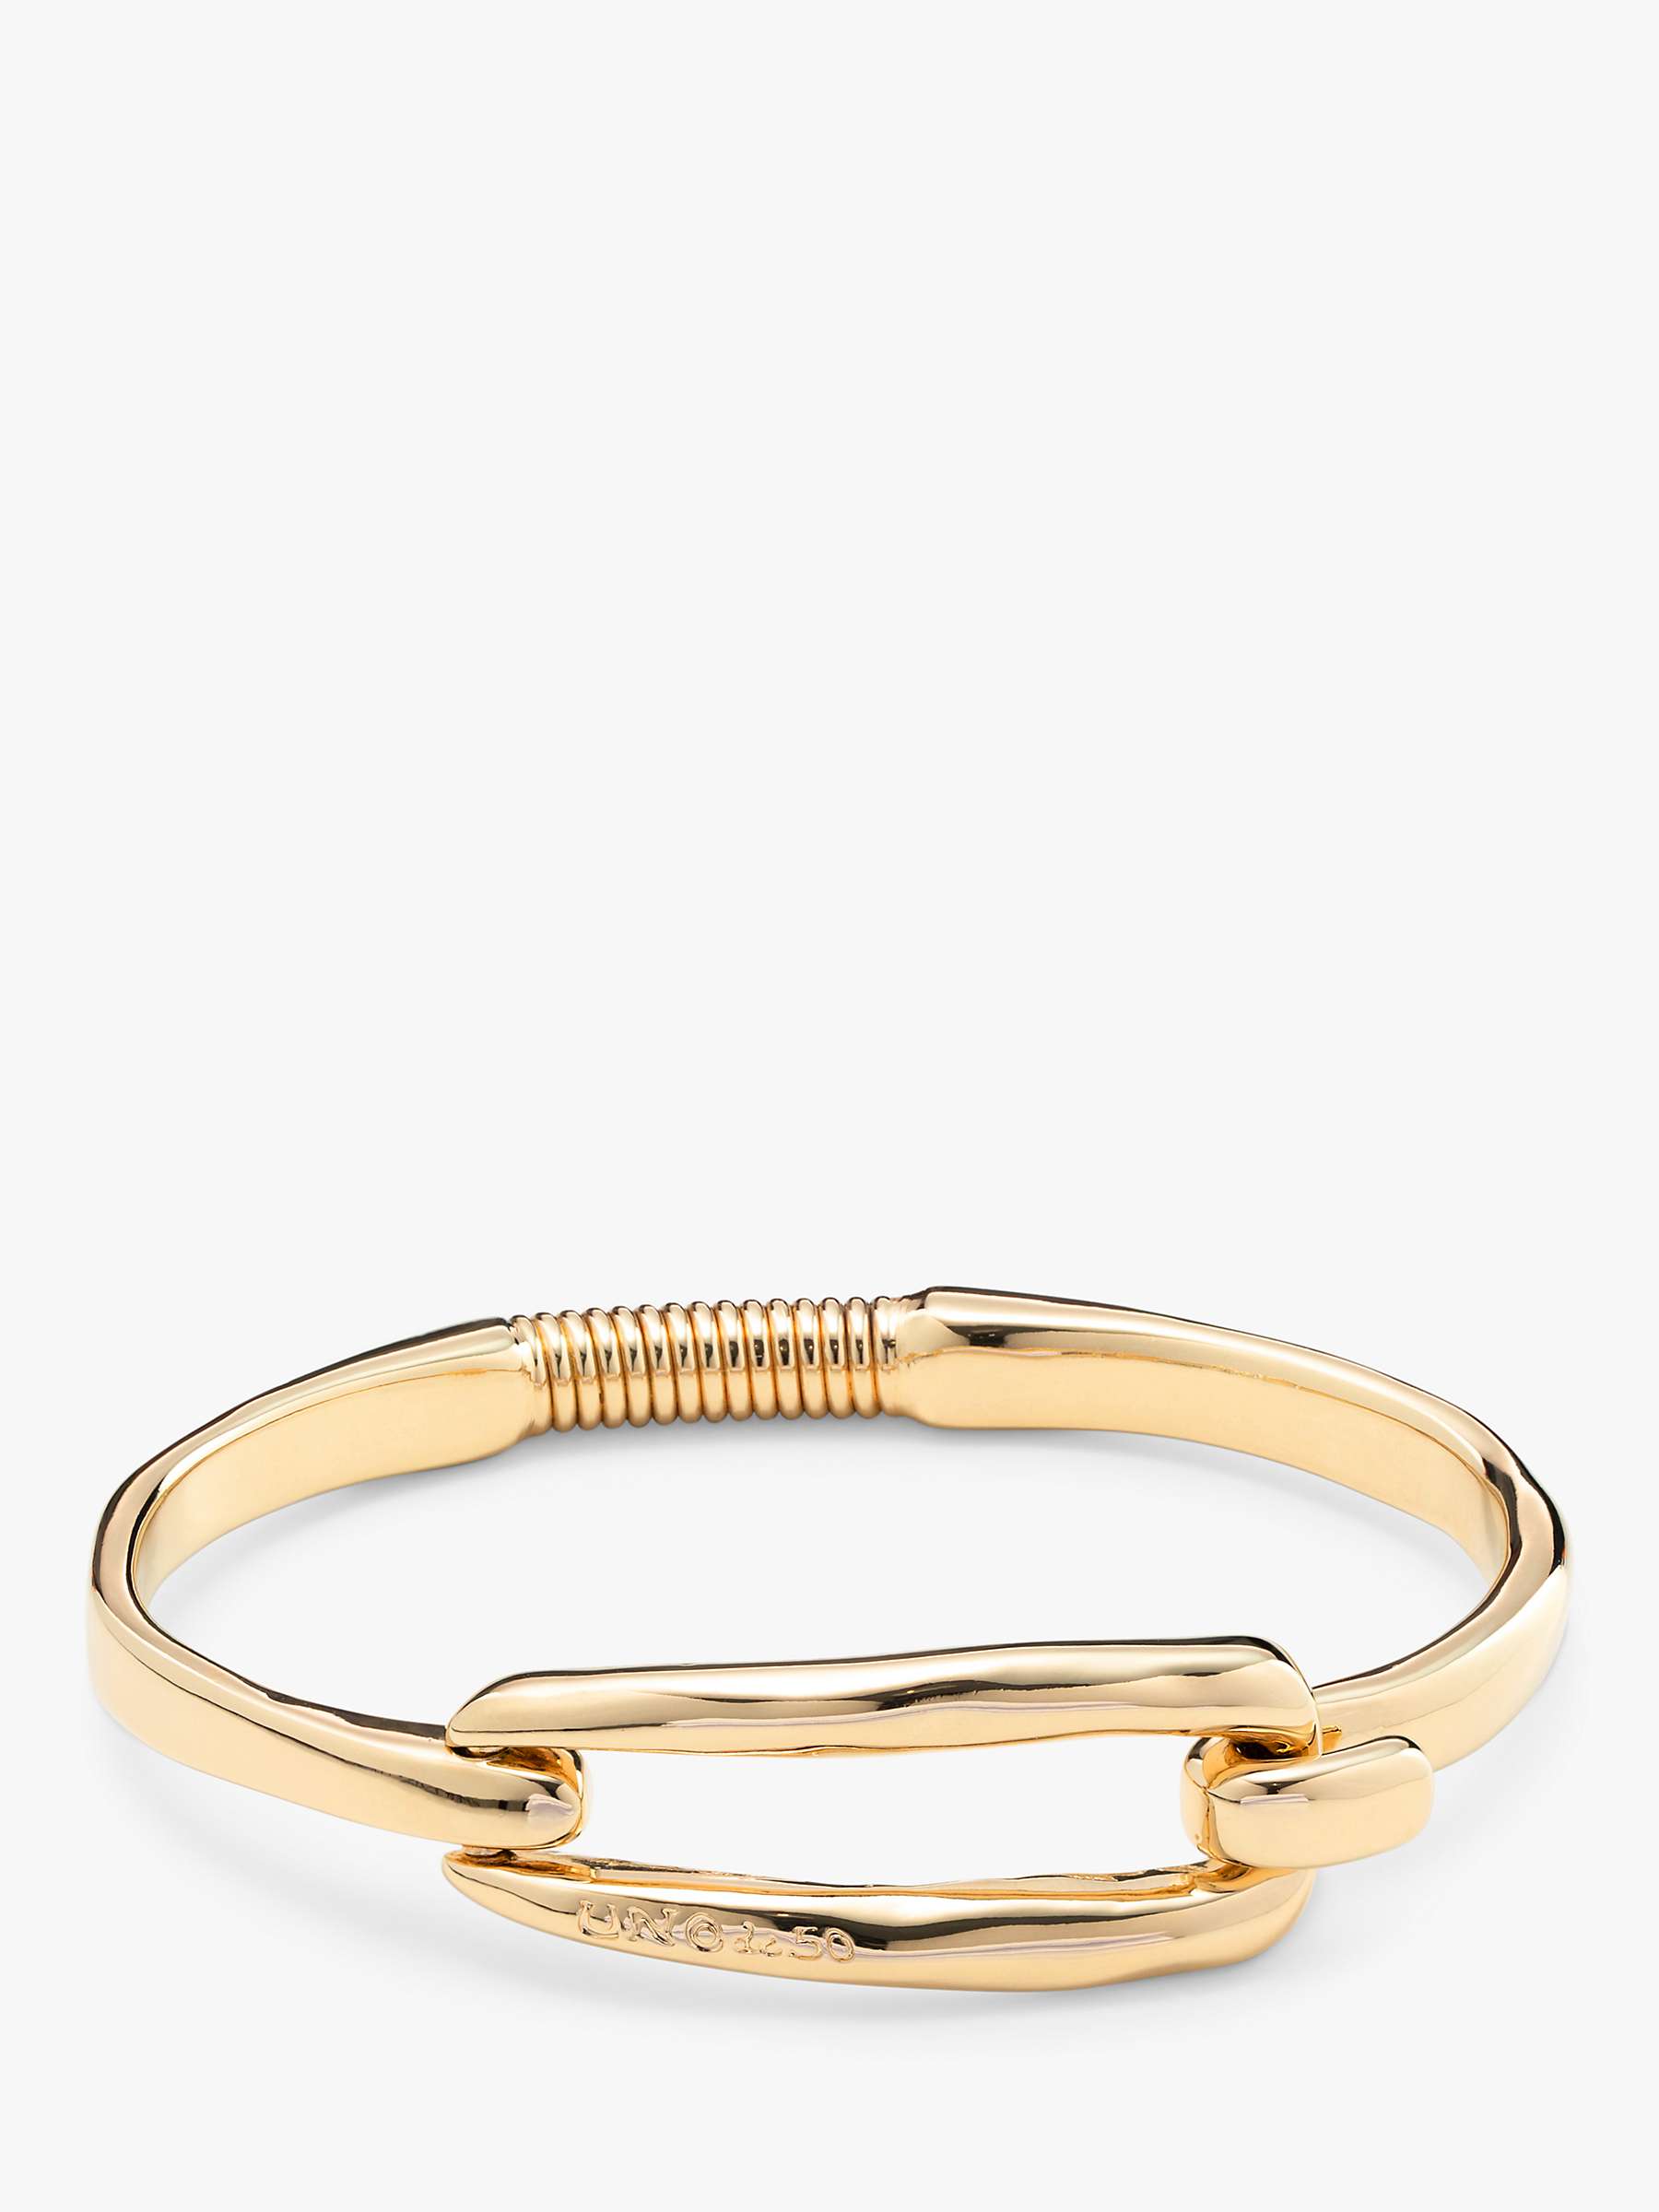 Buy UNOde50 Elongated Clasp Bangle, Gold Online at johnlewis.com